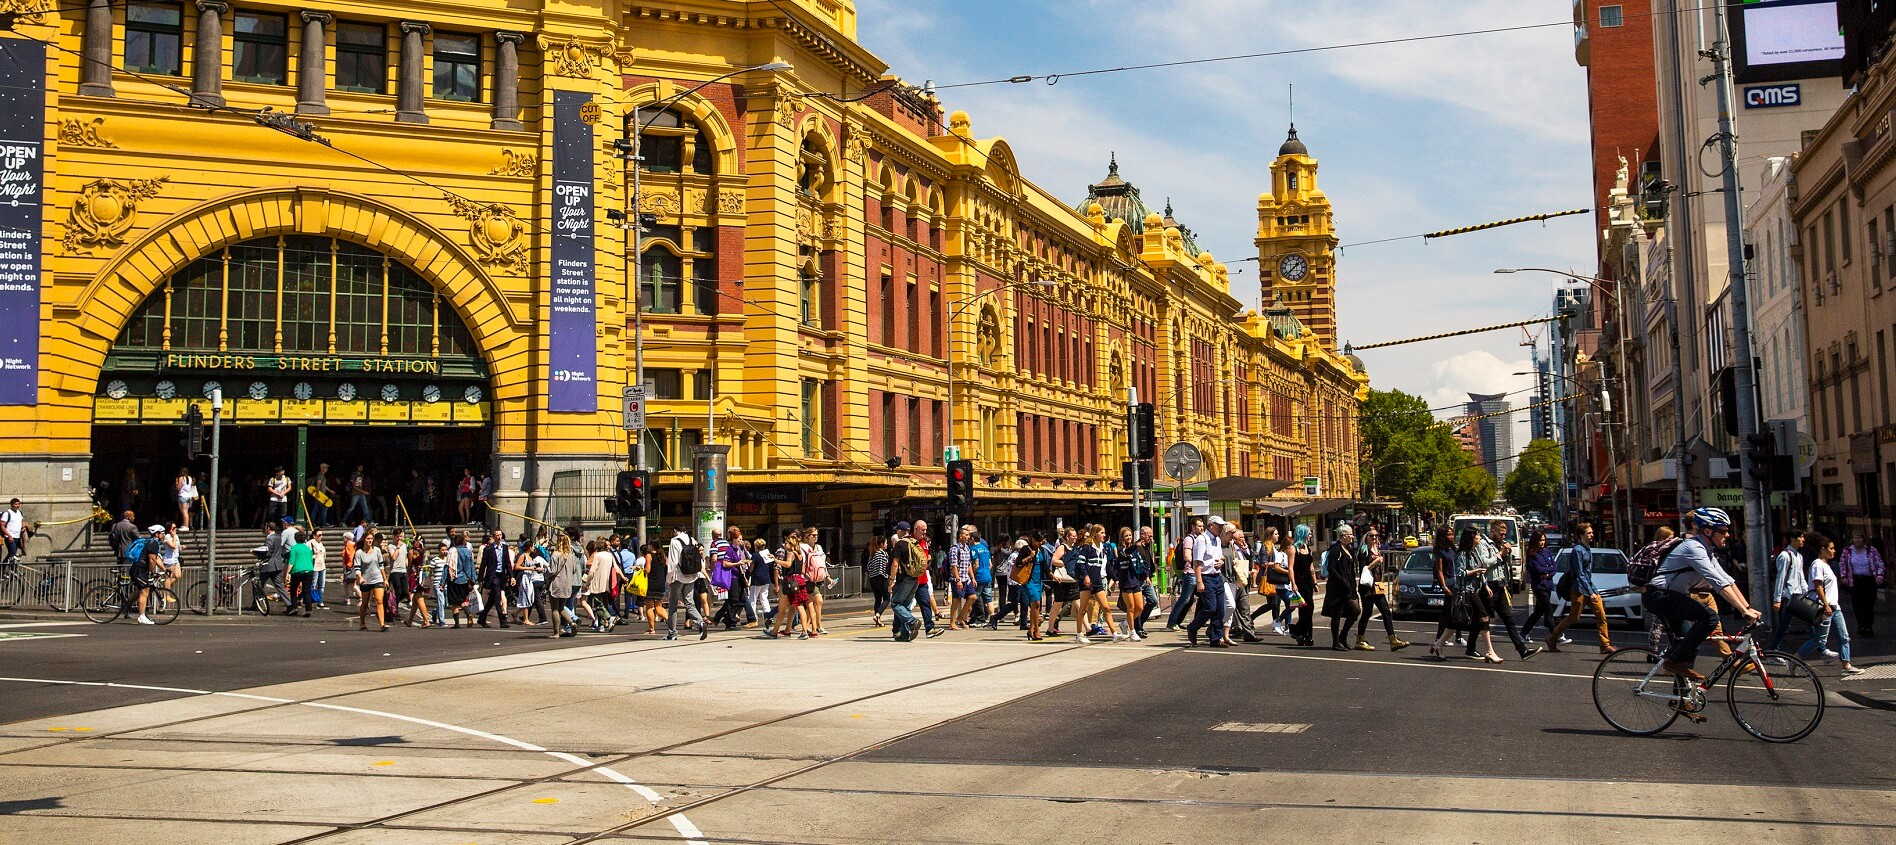 Why was Melbourne the most liveable city in the world?